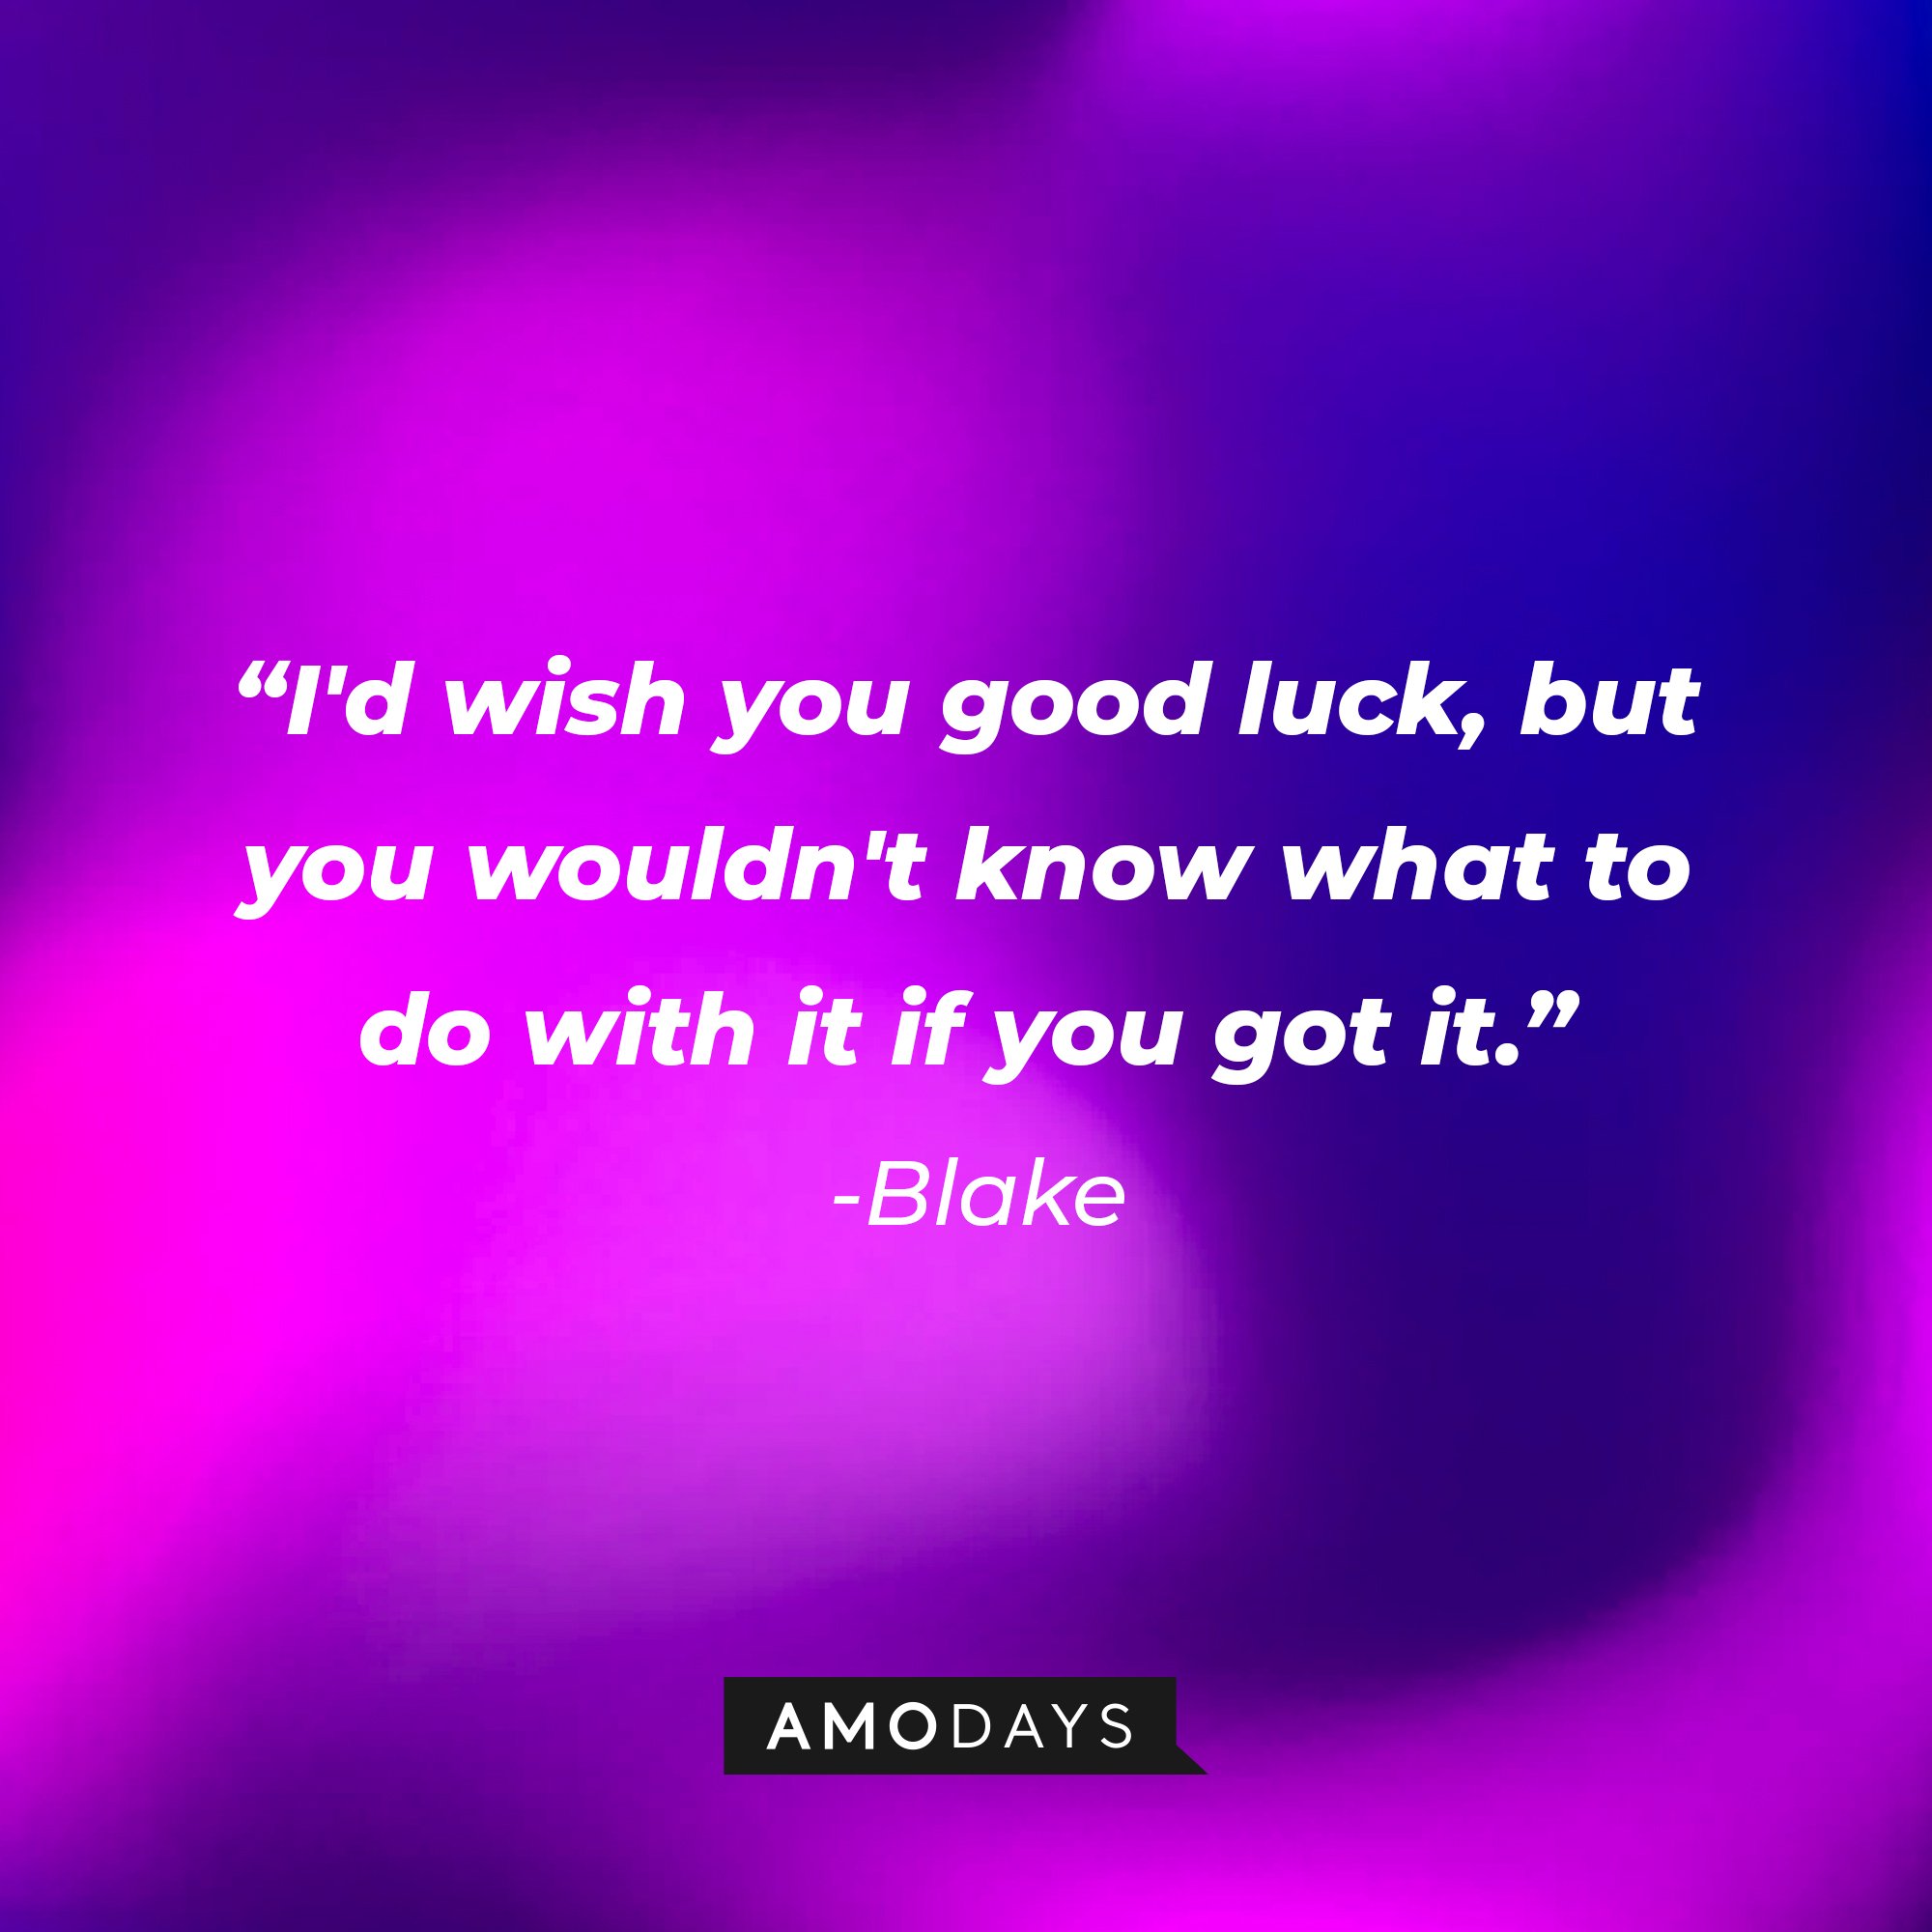 Blake's quote: "I'd wish you good luck, but you wouldn't know what to do with it if you got it." | Image: AmoDays